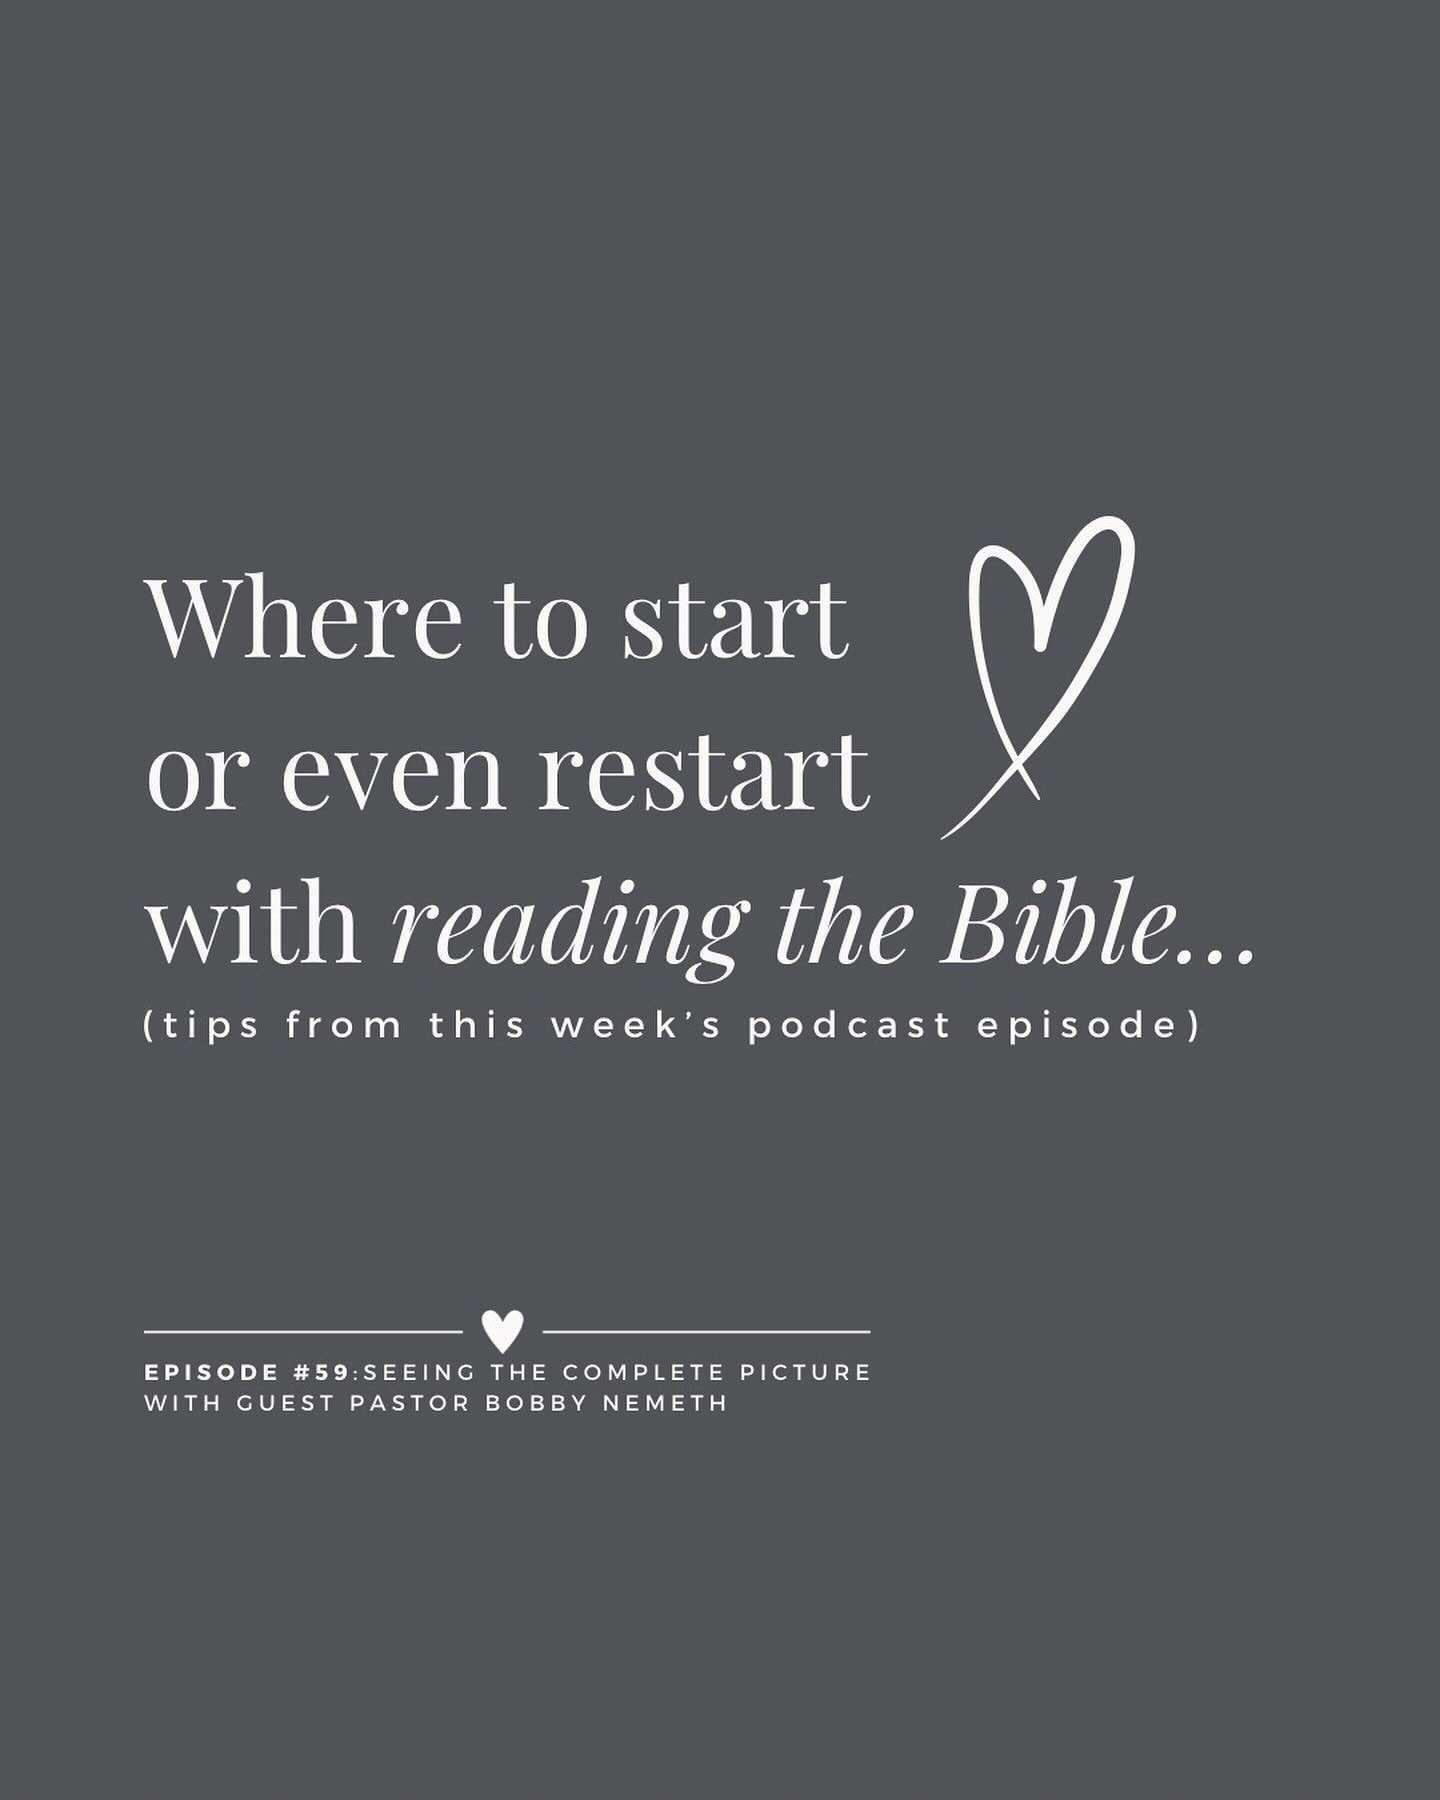 What are you reading in the Bible today? 

As always, if you want guidance or encouragement on where to start, please message me. 

So many times we may get an incomplete picture because we allow&hellip; expectations to cloud our experiences with Jes